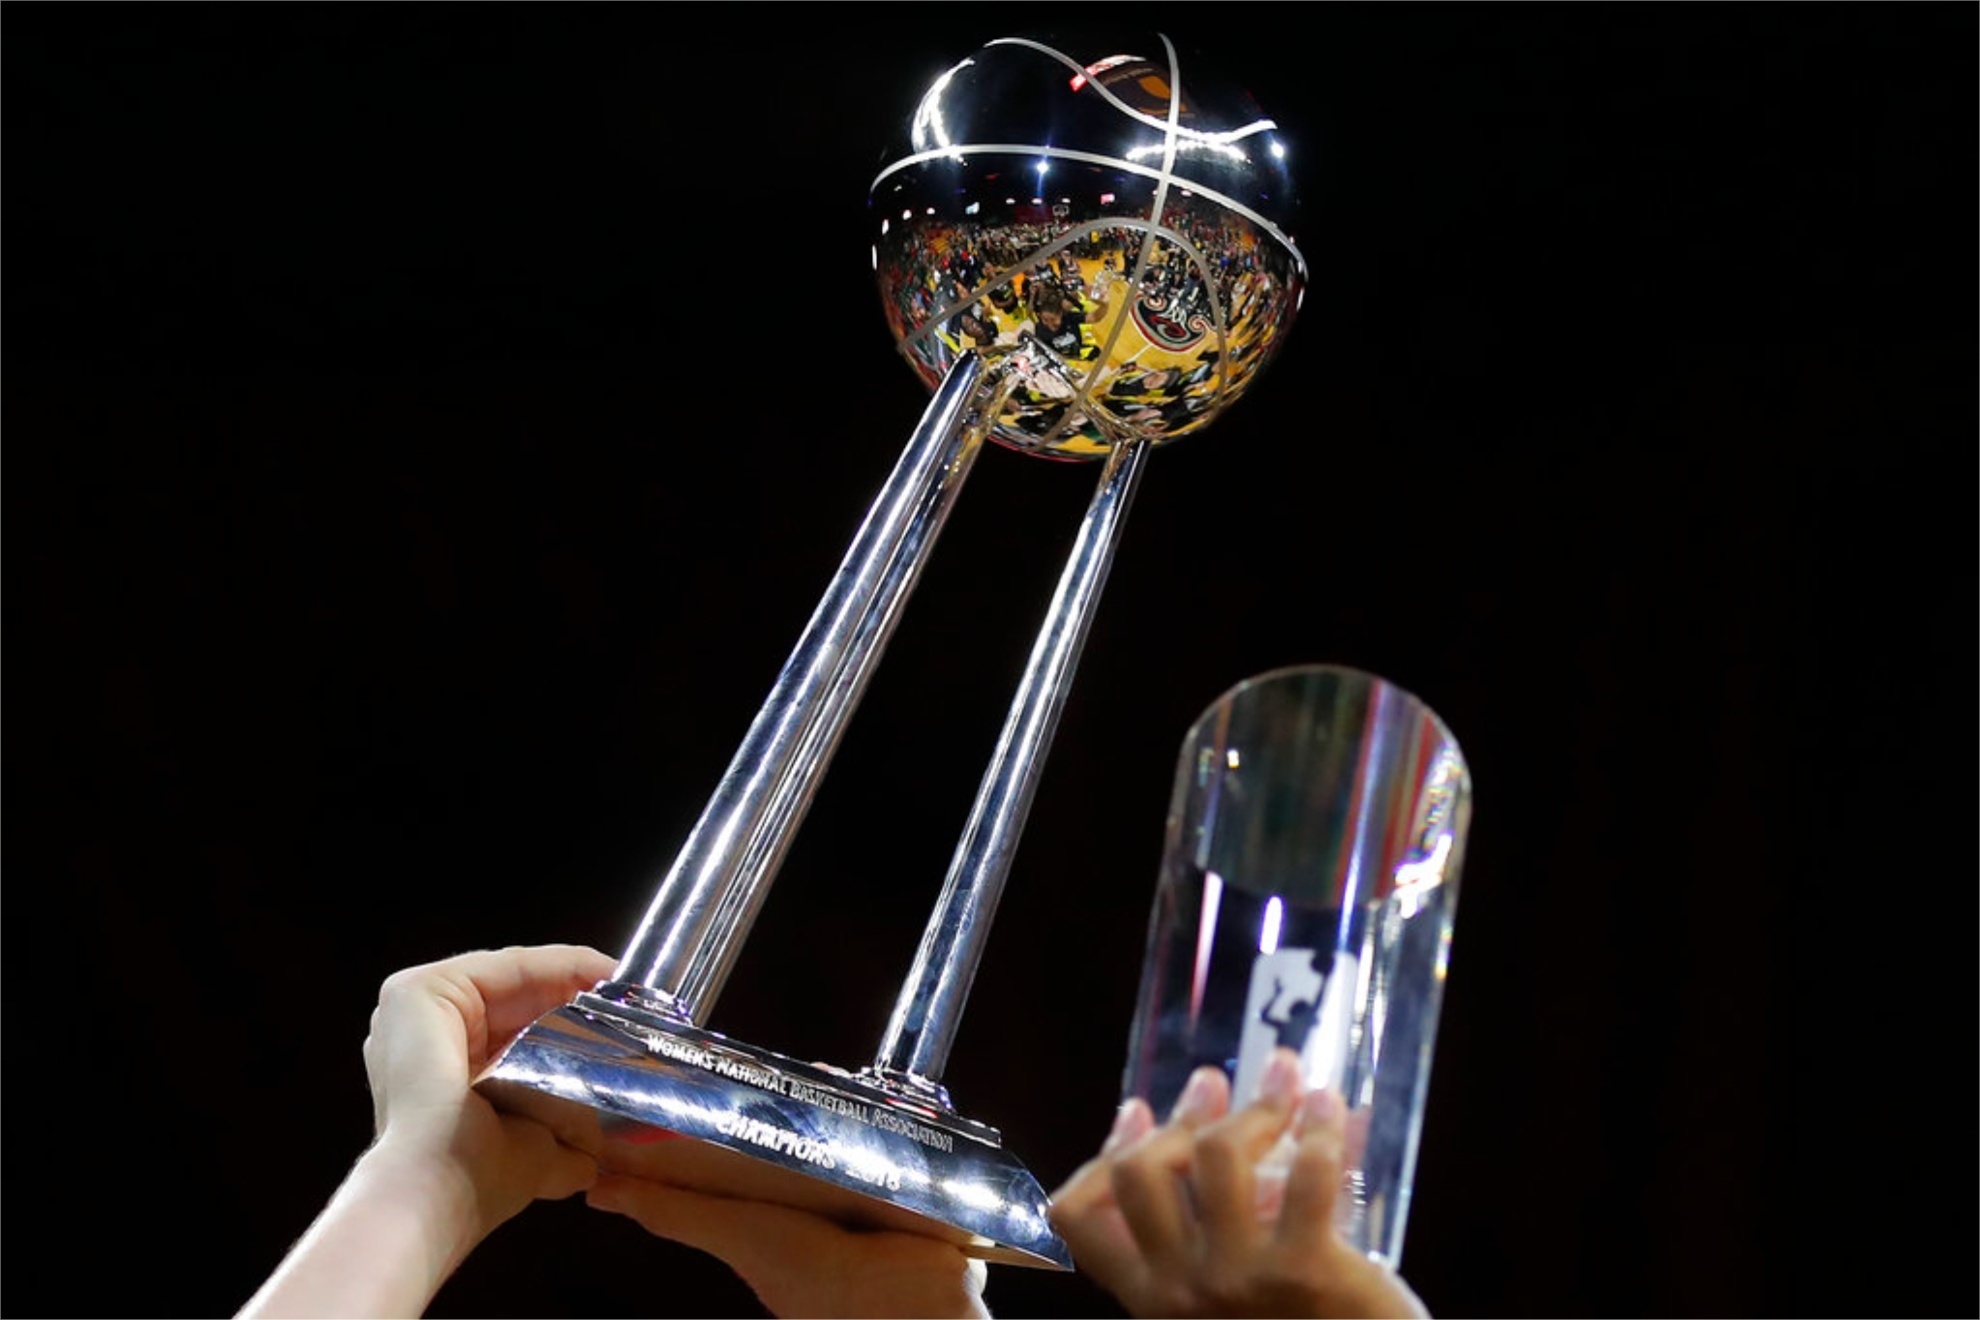 The WNBA winners prize money was negotiated under the current CBA deal in 2020